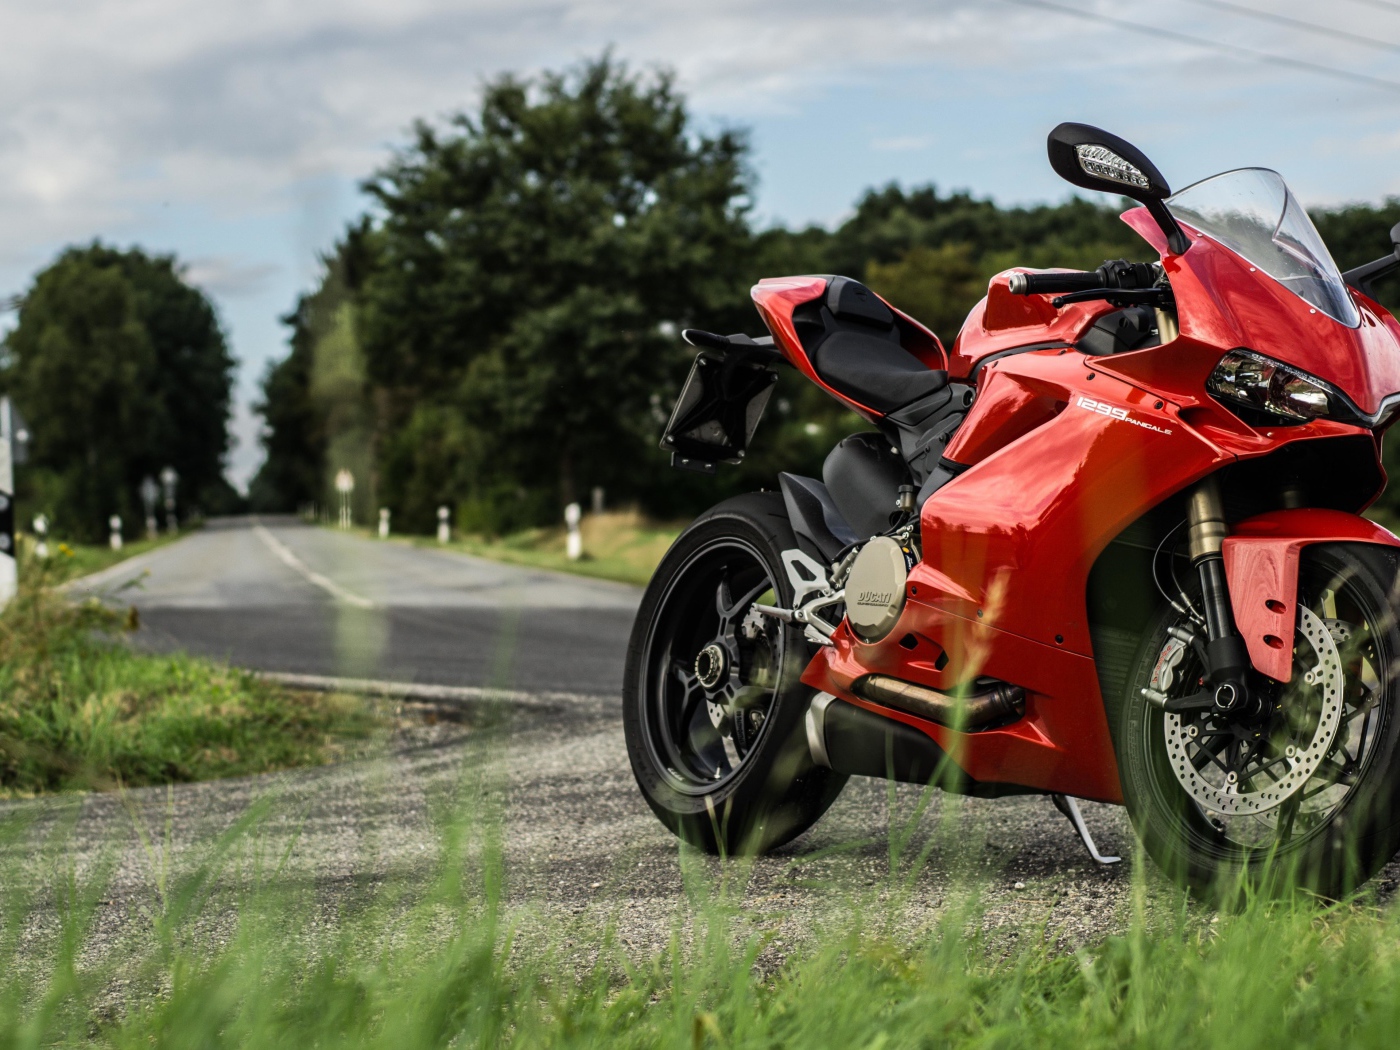 Red Ducati 1299 Panigale motorcycle on the track